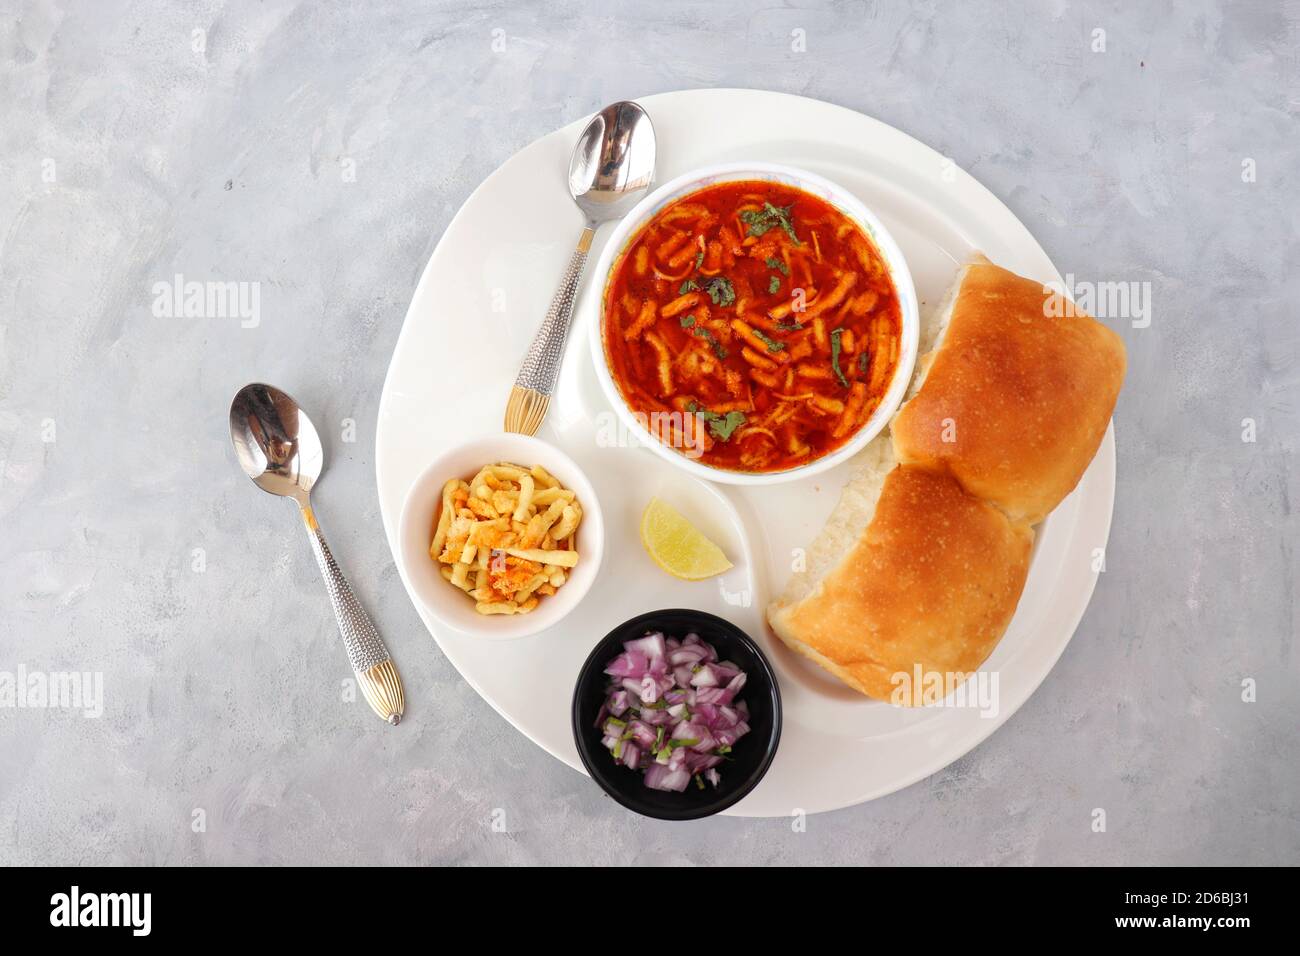 Spicy Misal Pav or usal Pav is a traditional snack or Chaat food from Maharashtra, India. Served with chopped onion, lemon wedges and farsan. Stock Photo